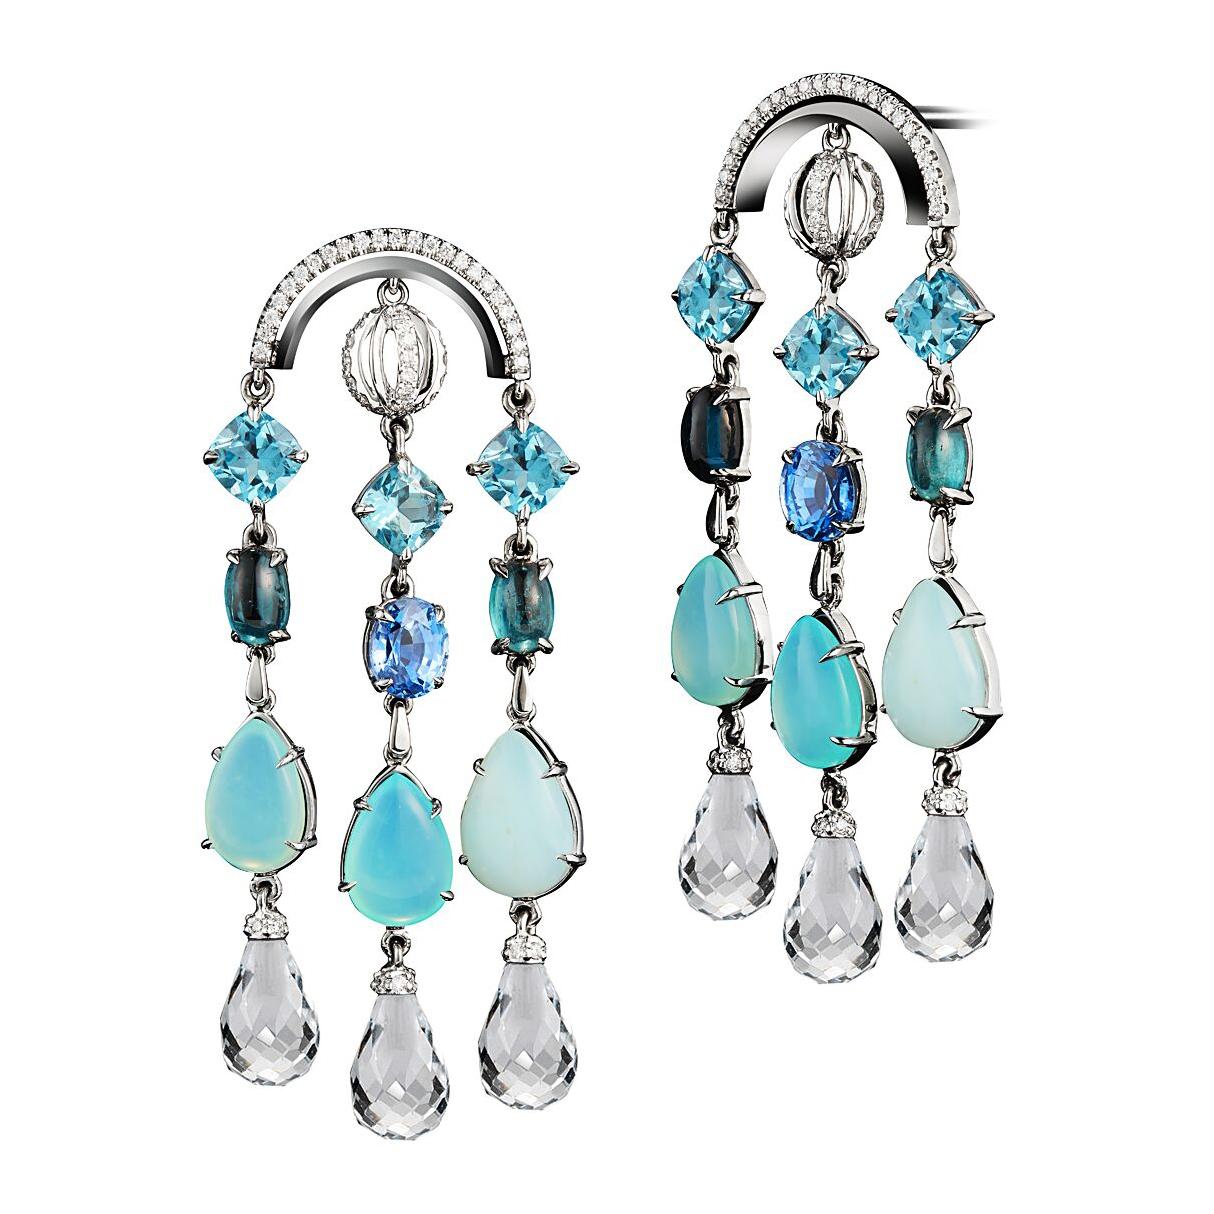 Arched Sautior Earrings with Diamonds, Precious Stones and Snowflakes For Sale